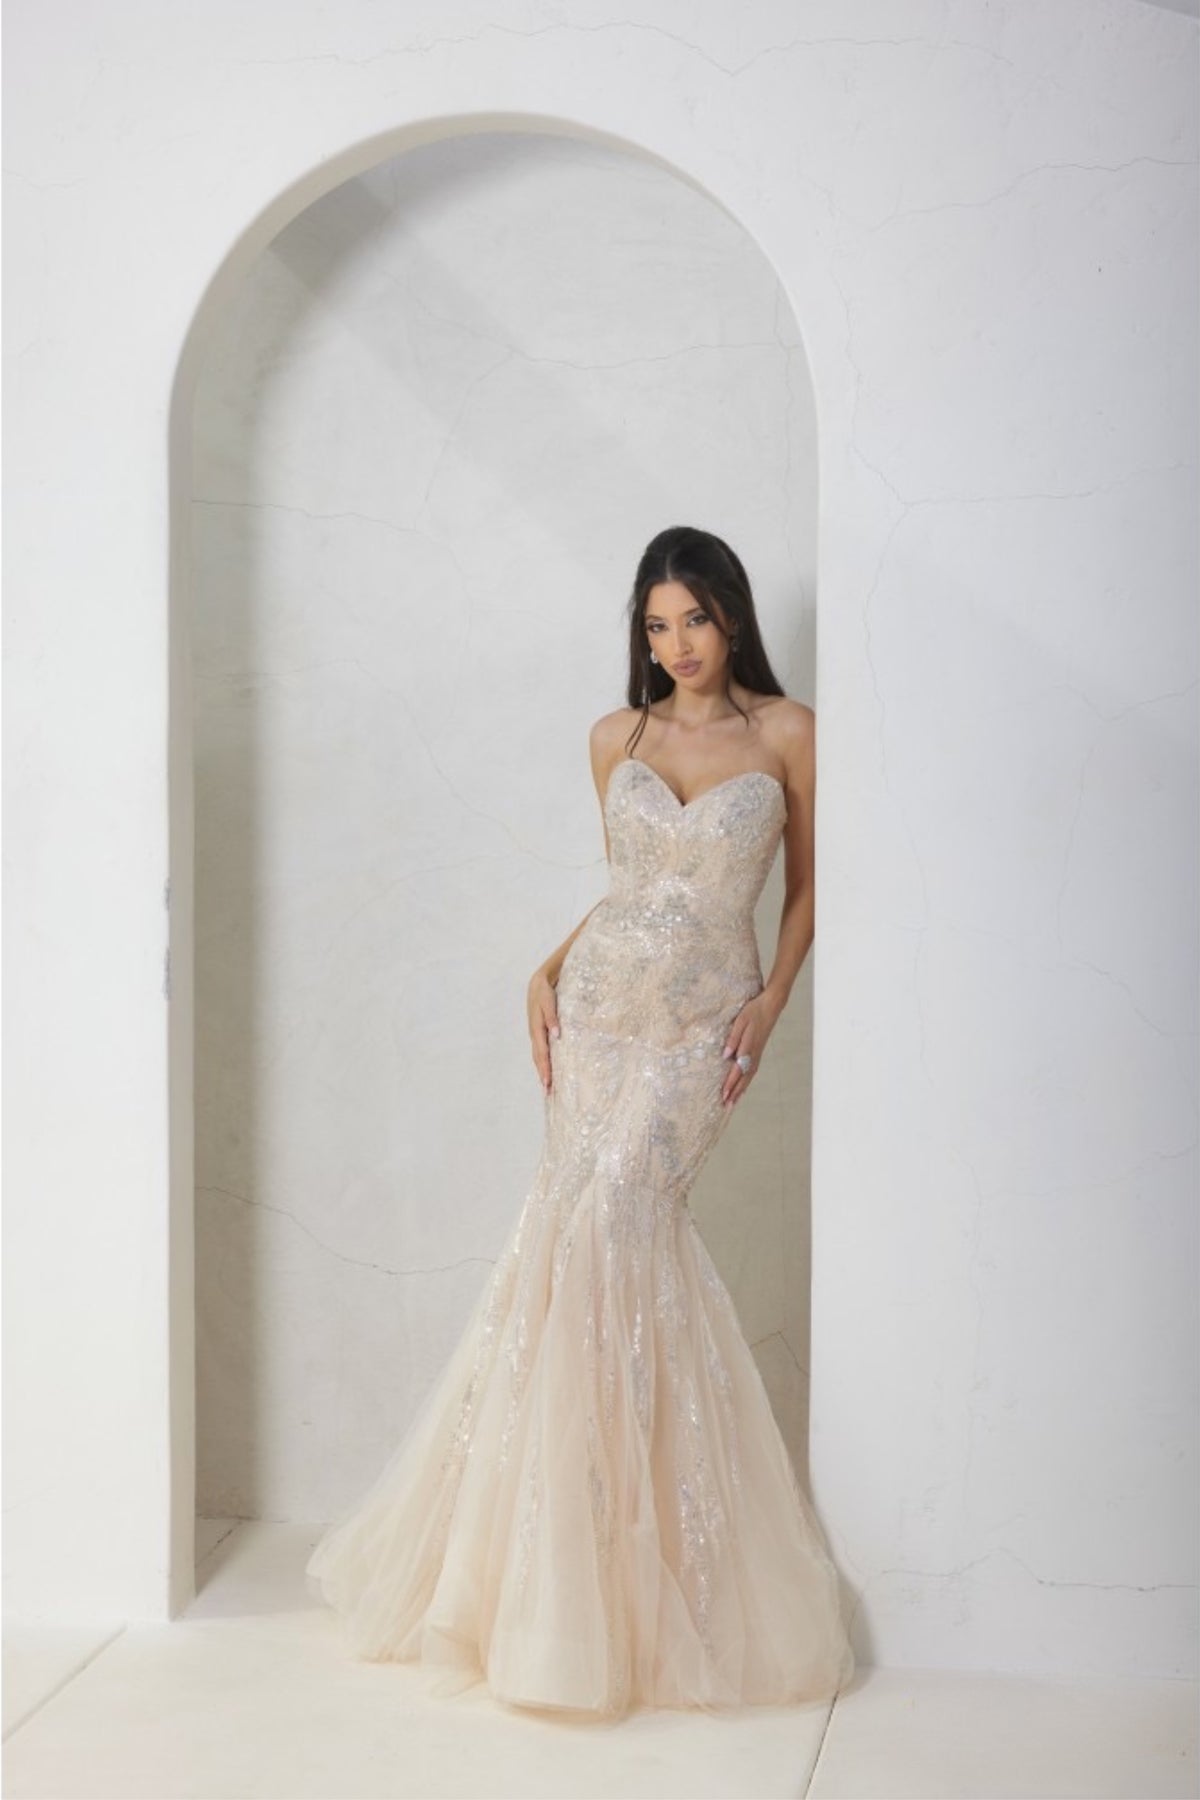 Terani Couture 241P2219 Sleeveless Beaded Trumpet Evening Gown - A sophisticated evening gown with a sleeveless trumpet silhouette, beaded detailing on tulle, a sweetheart neckline, and a long dress for a timeless and glamorous look. This is a picture of the dress in Champagne.